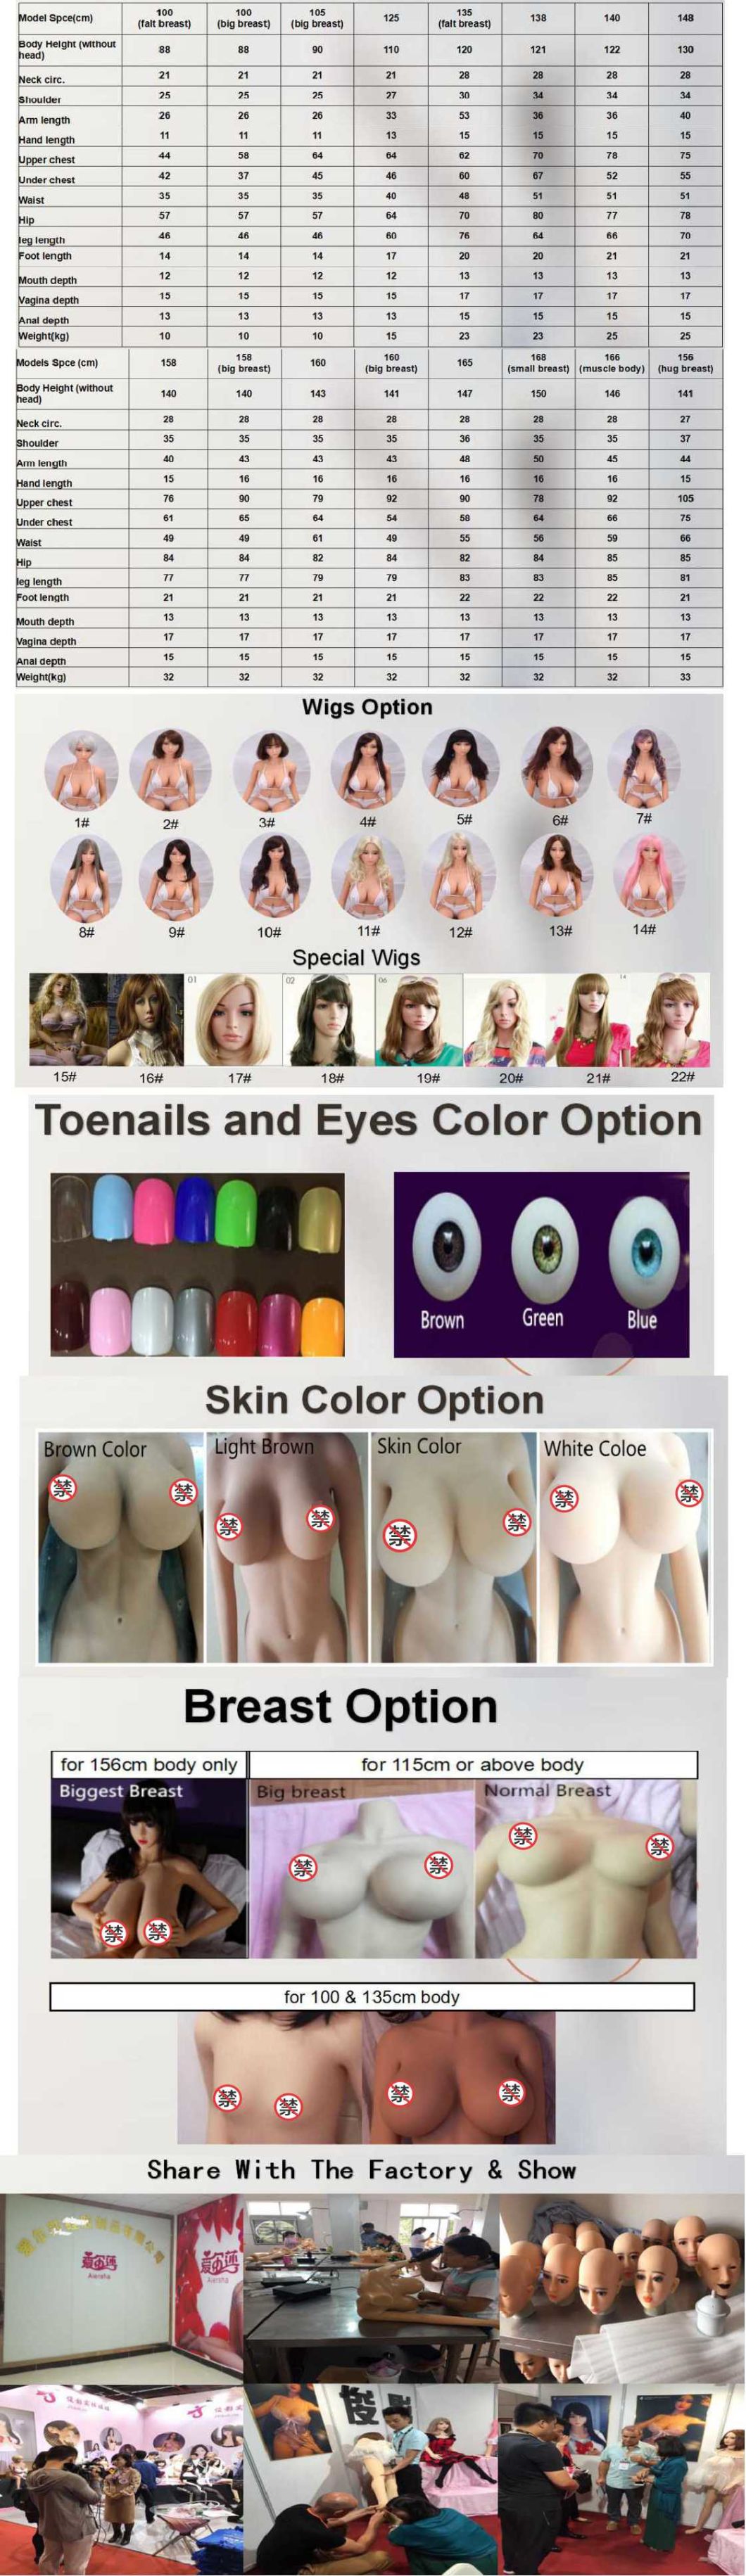 Men Making Love with a Silicone Sex Doll 166cm Heavy Sex Pictures with Sex Doll Sex Muscle Doll Newest Unique Model